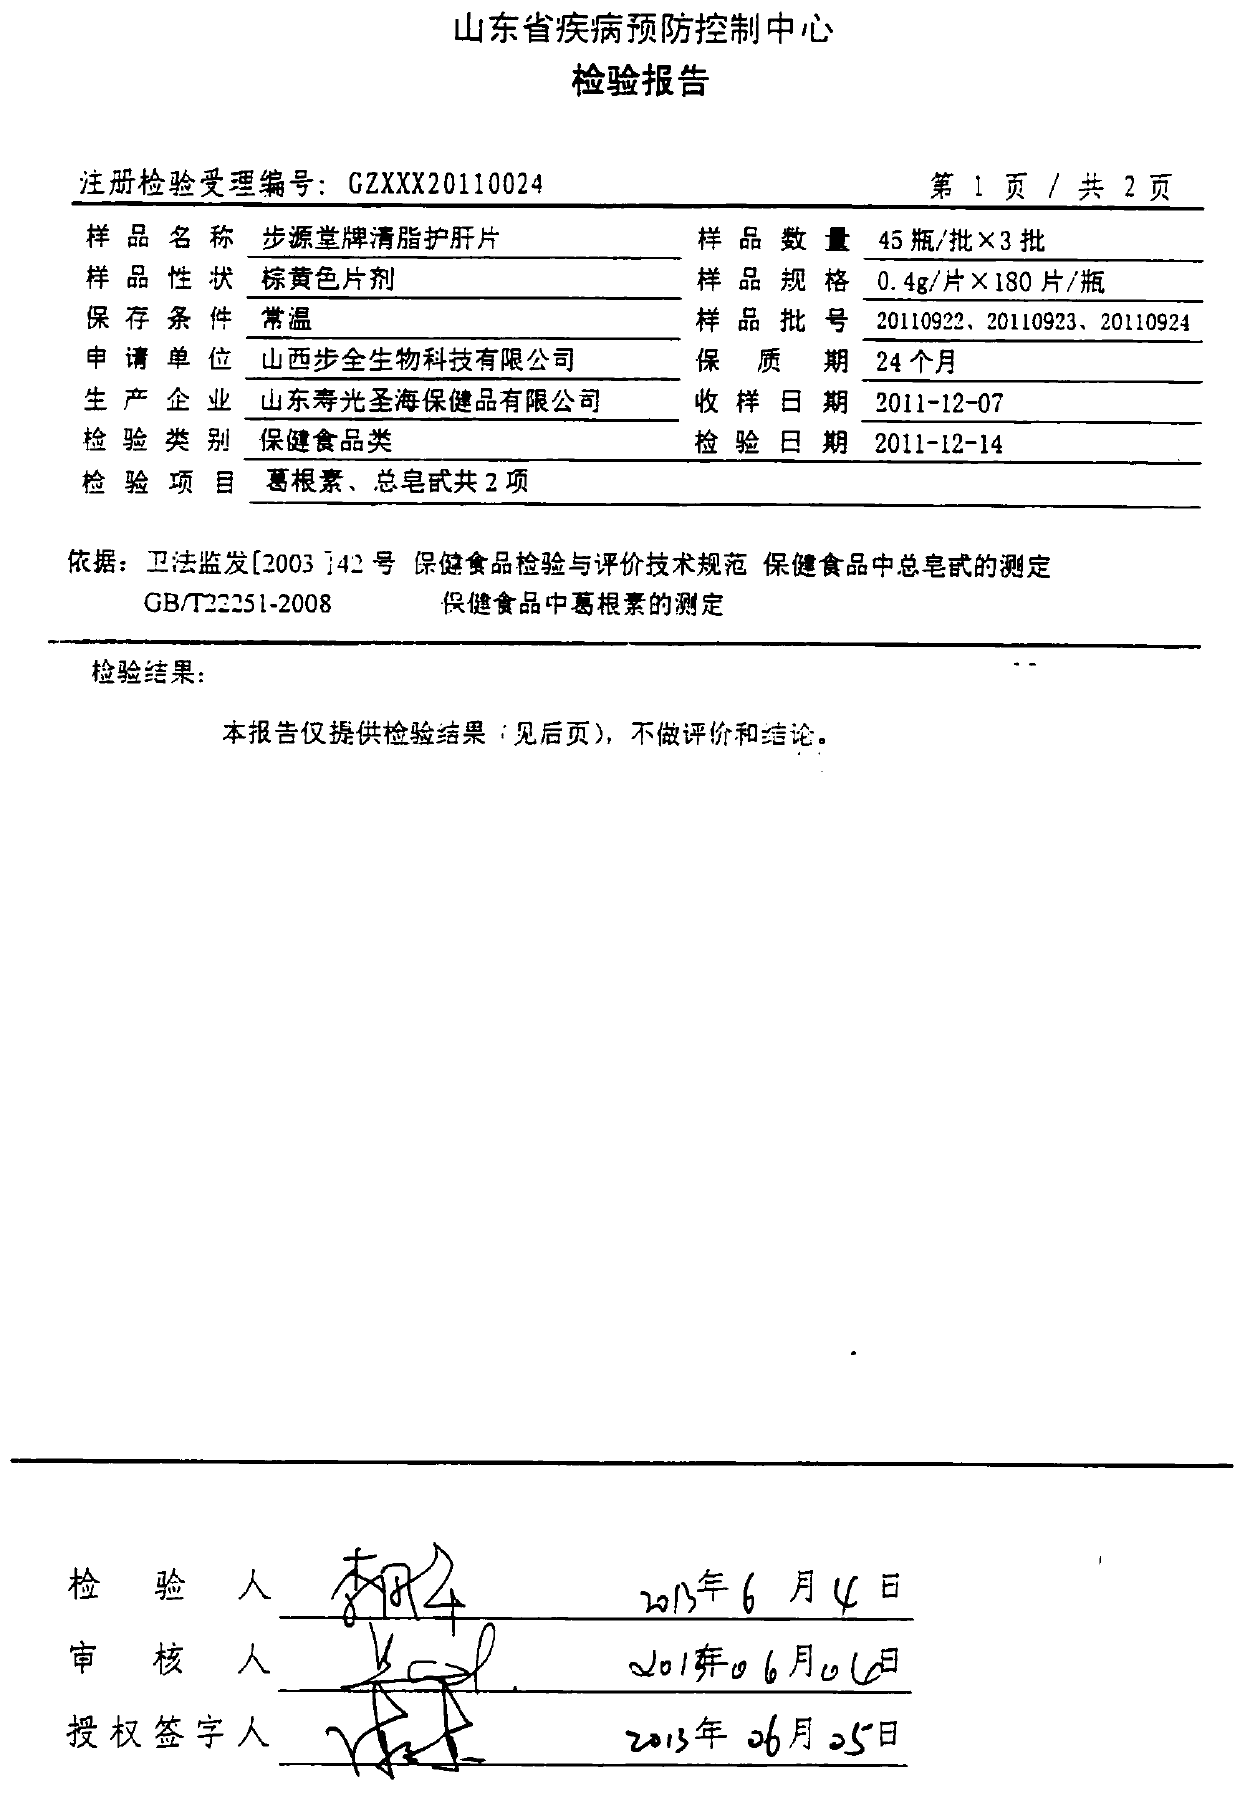 Health care product having functions of protecting liver and lowering blood lipid